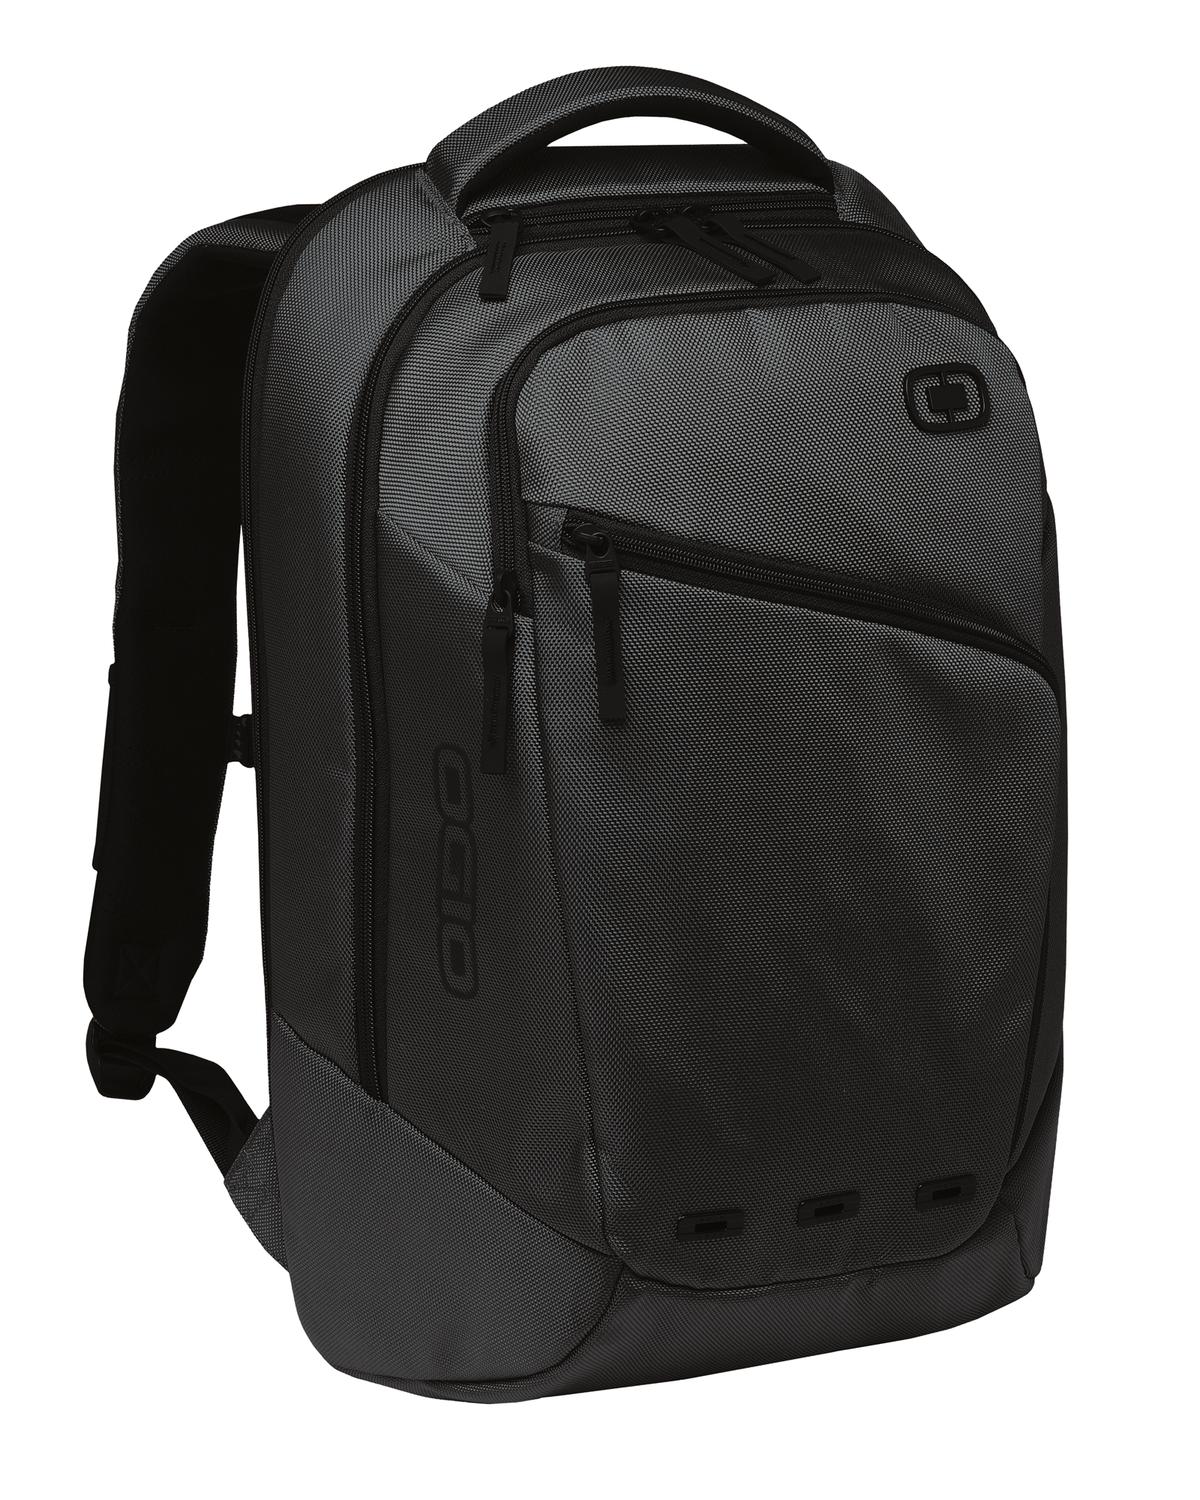 OGIO® Ace Pack. 411061